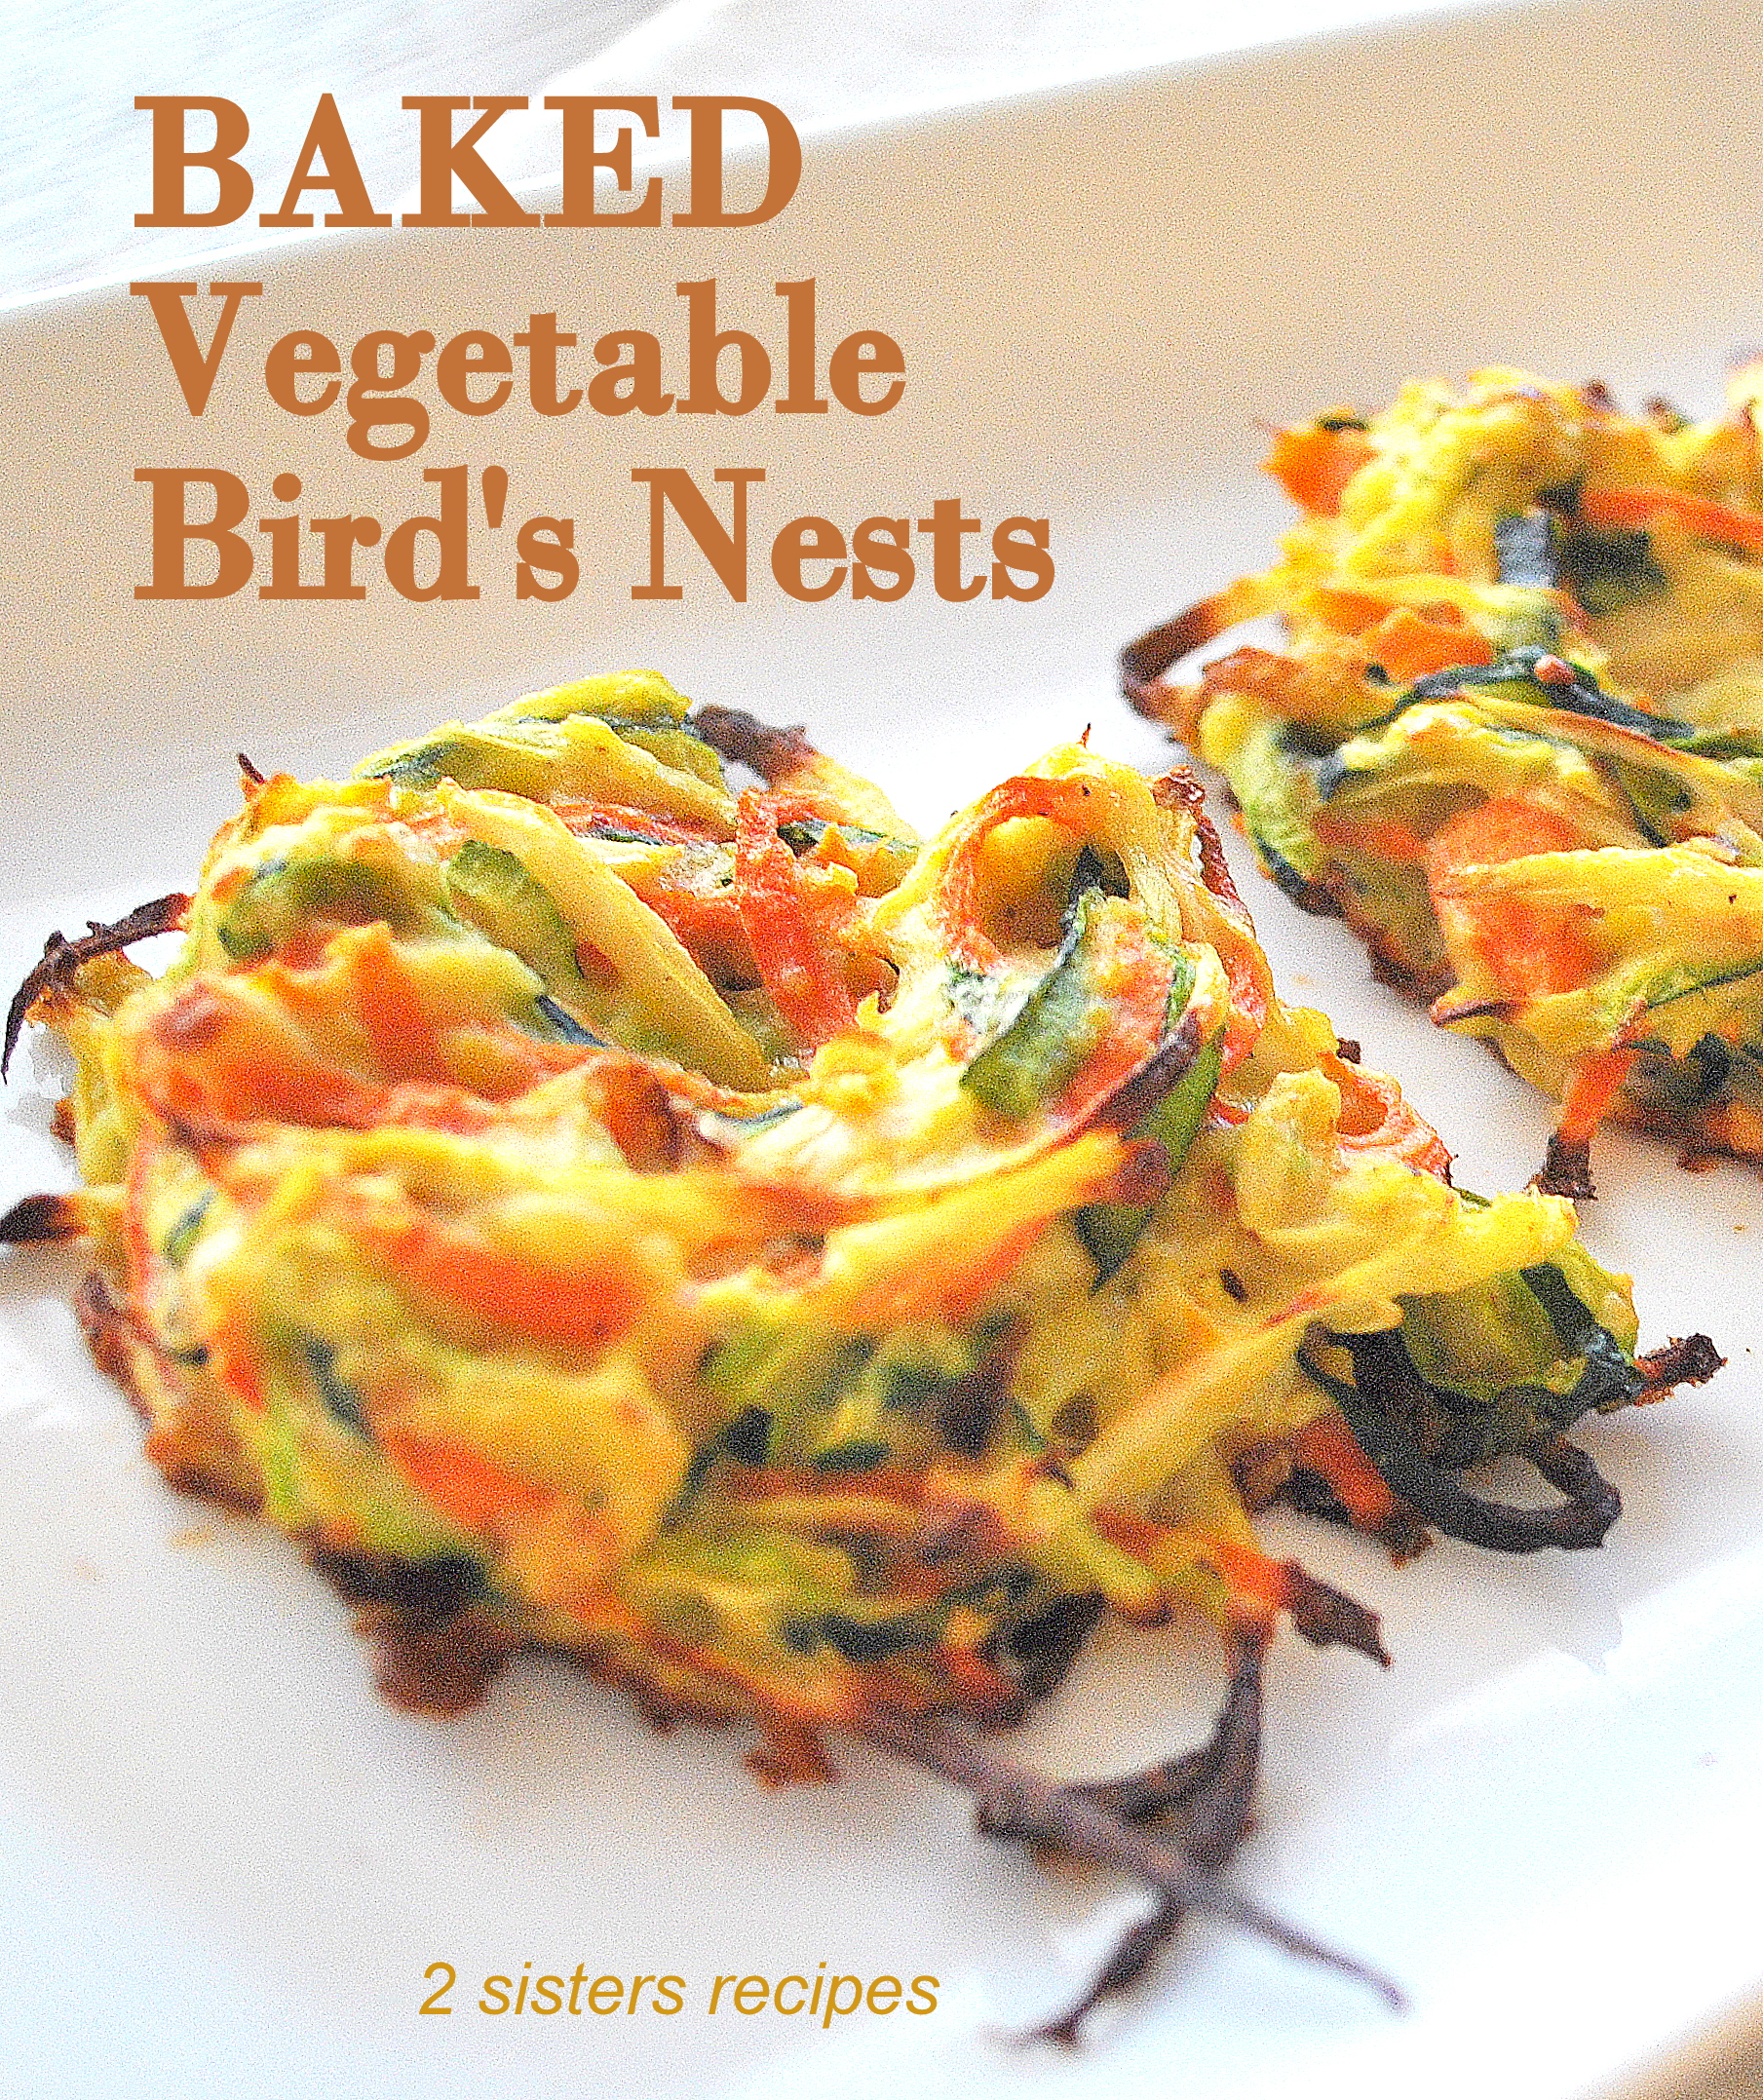 Baked Vegetable Bird's Nests by 2sistersrecipes.com